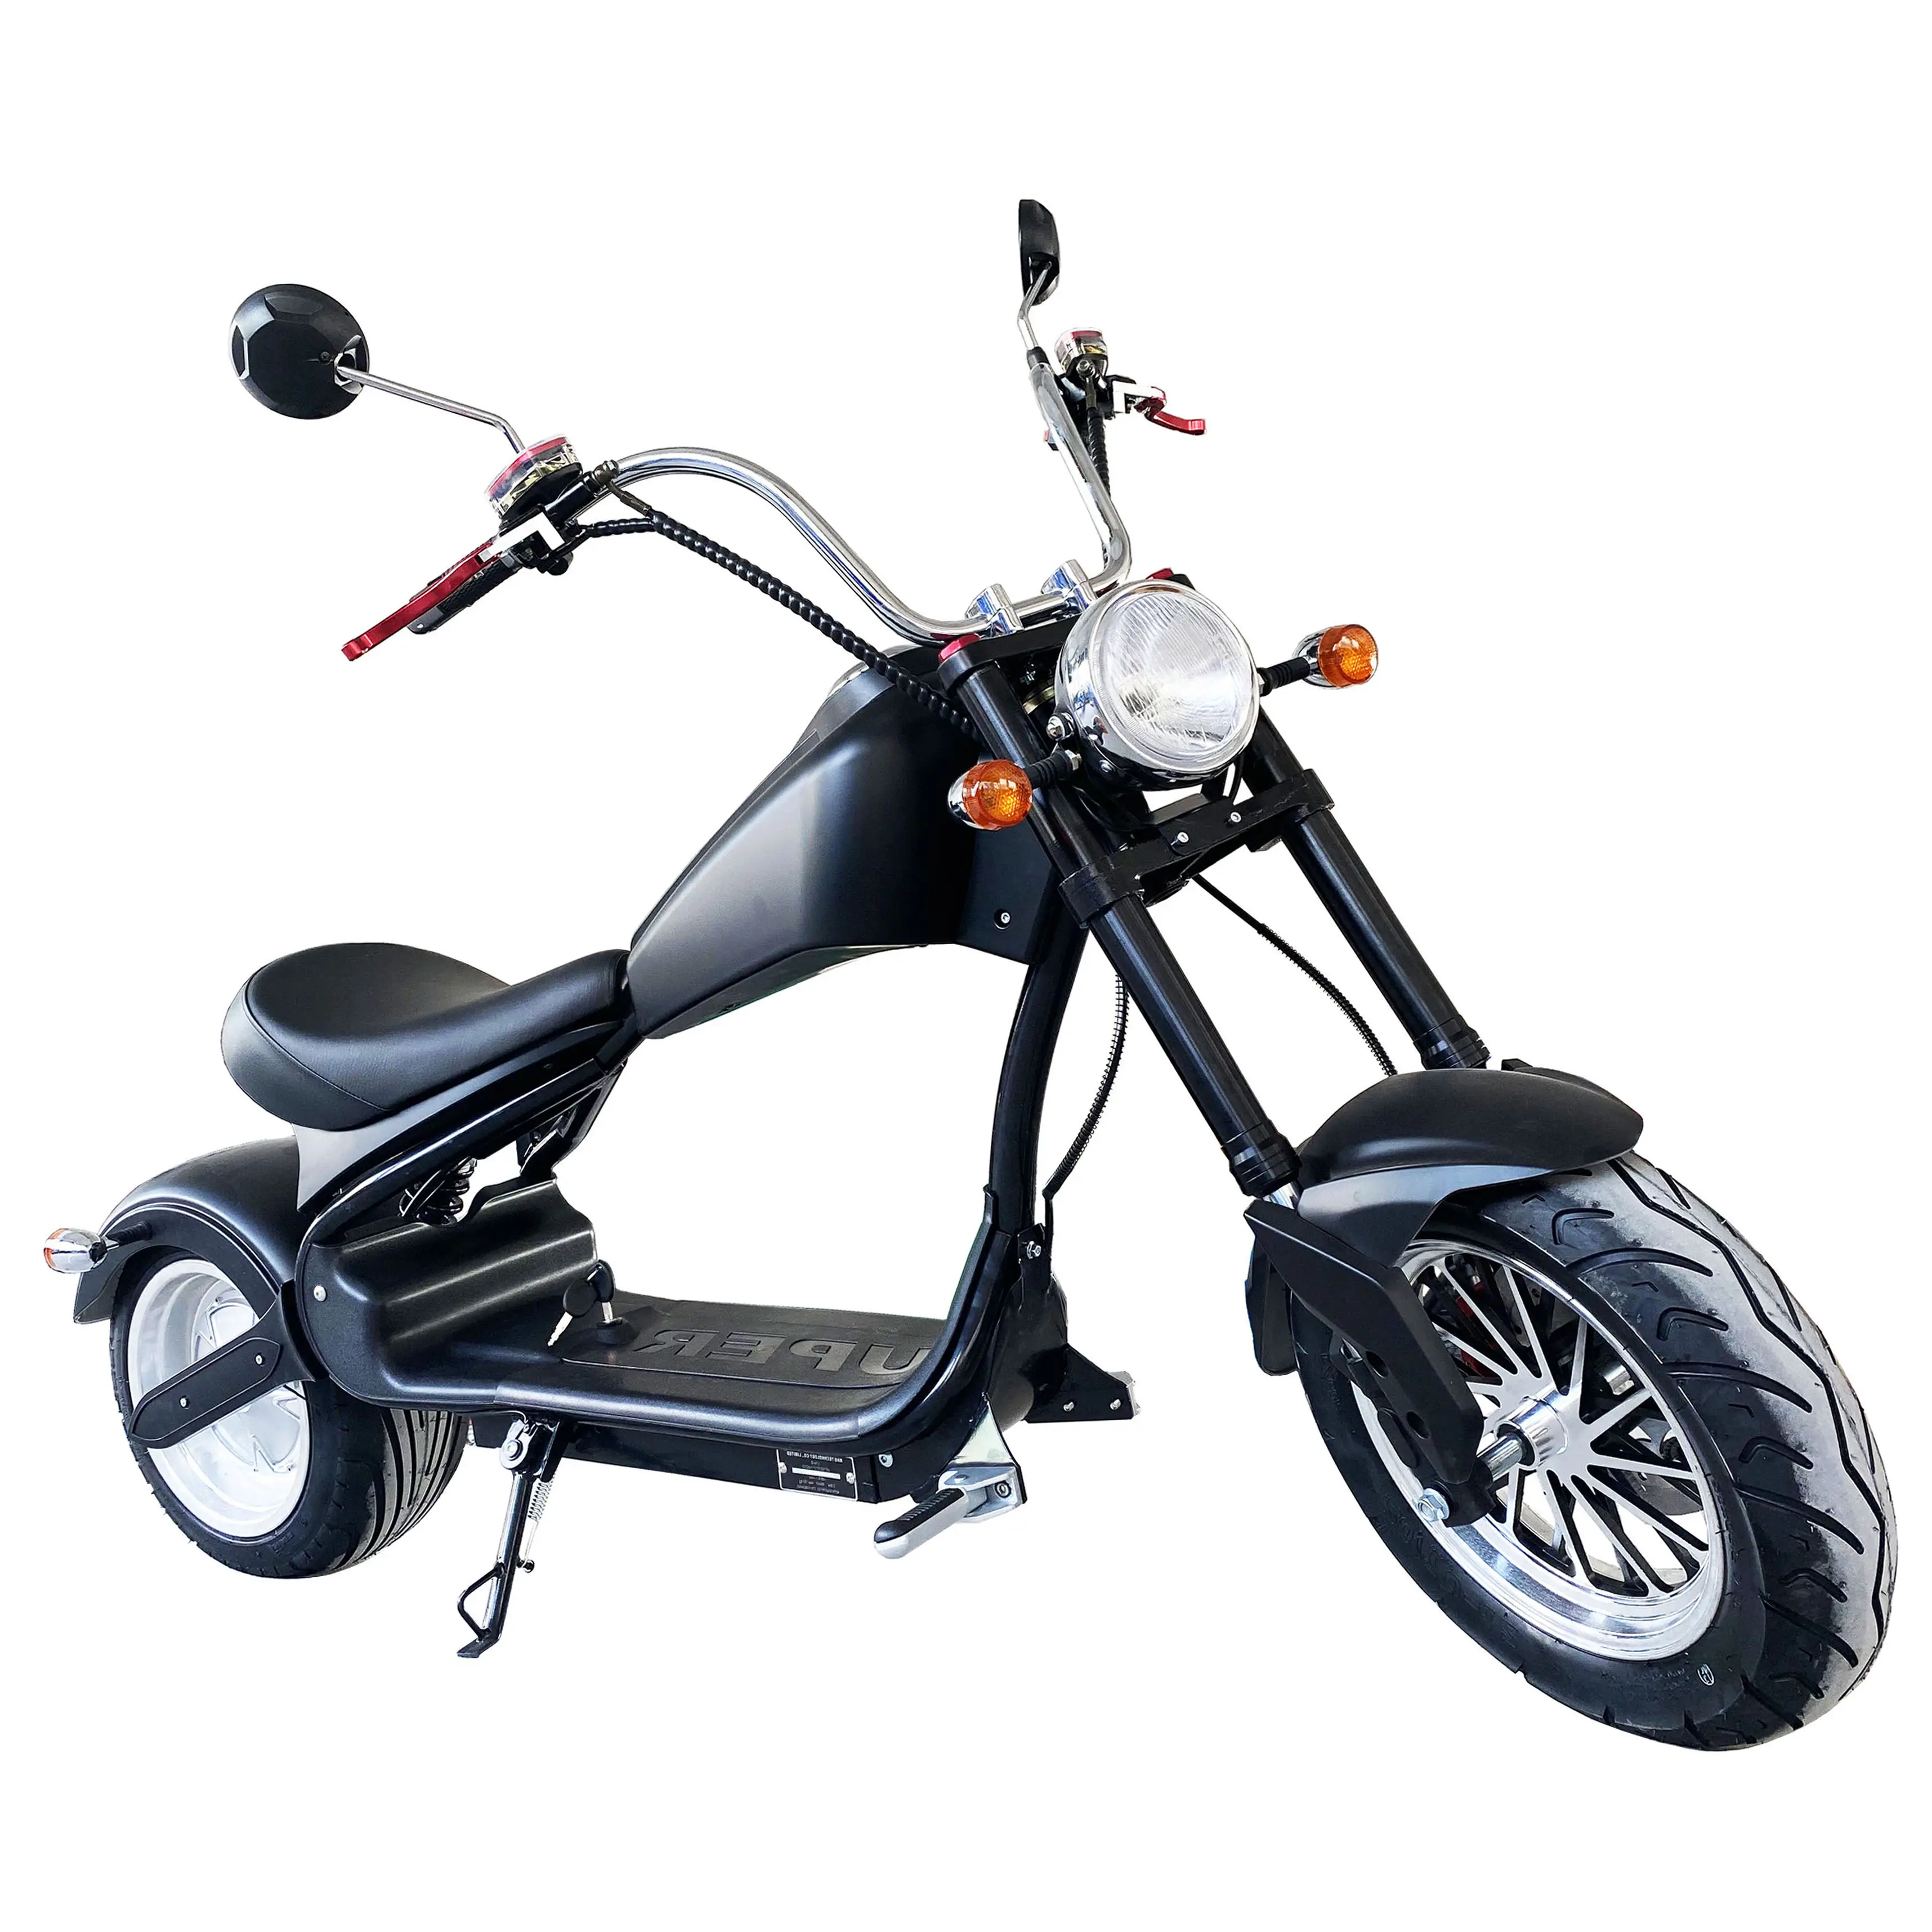 Factory Manufacturing citycoco with baby seat Golf Evo 50cc motorcycles Electric Scooter for Adult